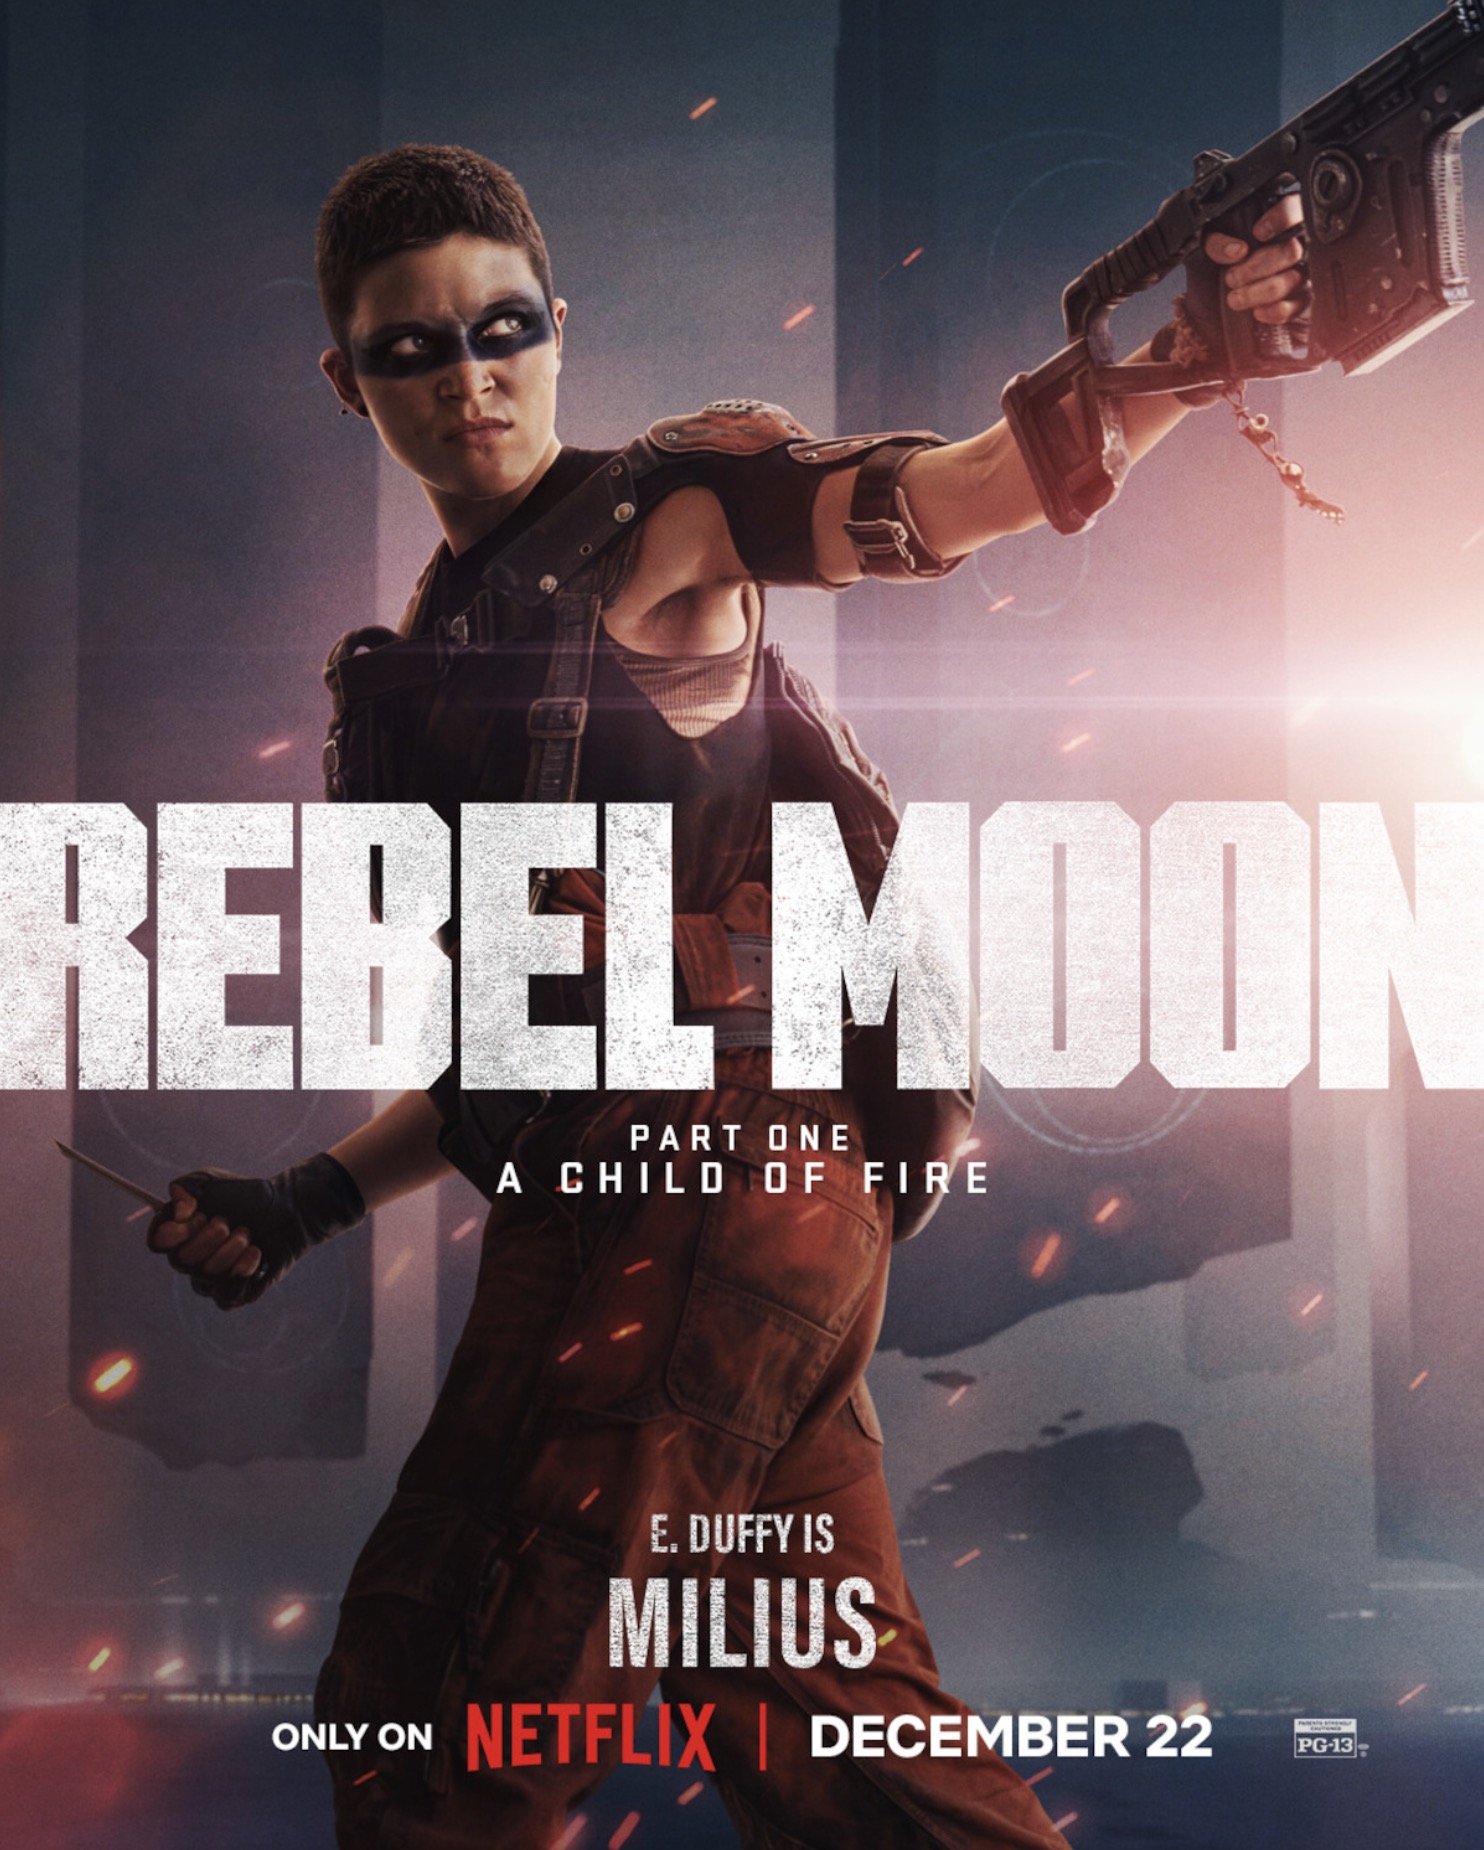 Trailer of Zack Snyder Rebel Moon Part 1, A Child of Fire, is here, part 2  gets a release date- Cinema express